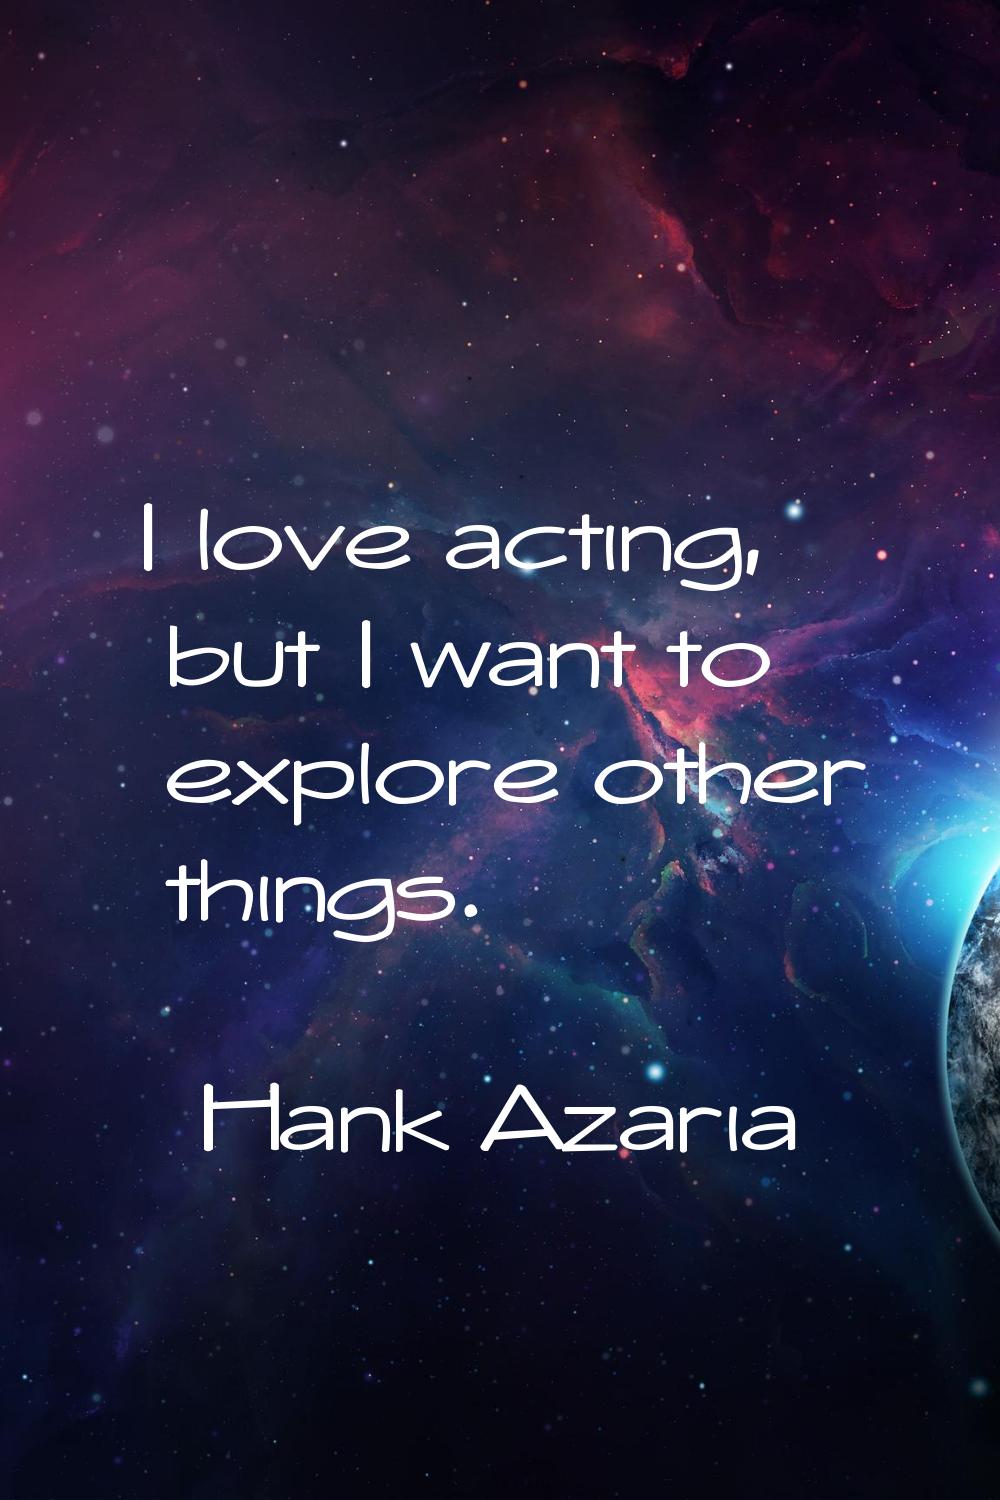 I love acting, but I want to explore other things.